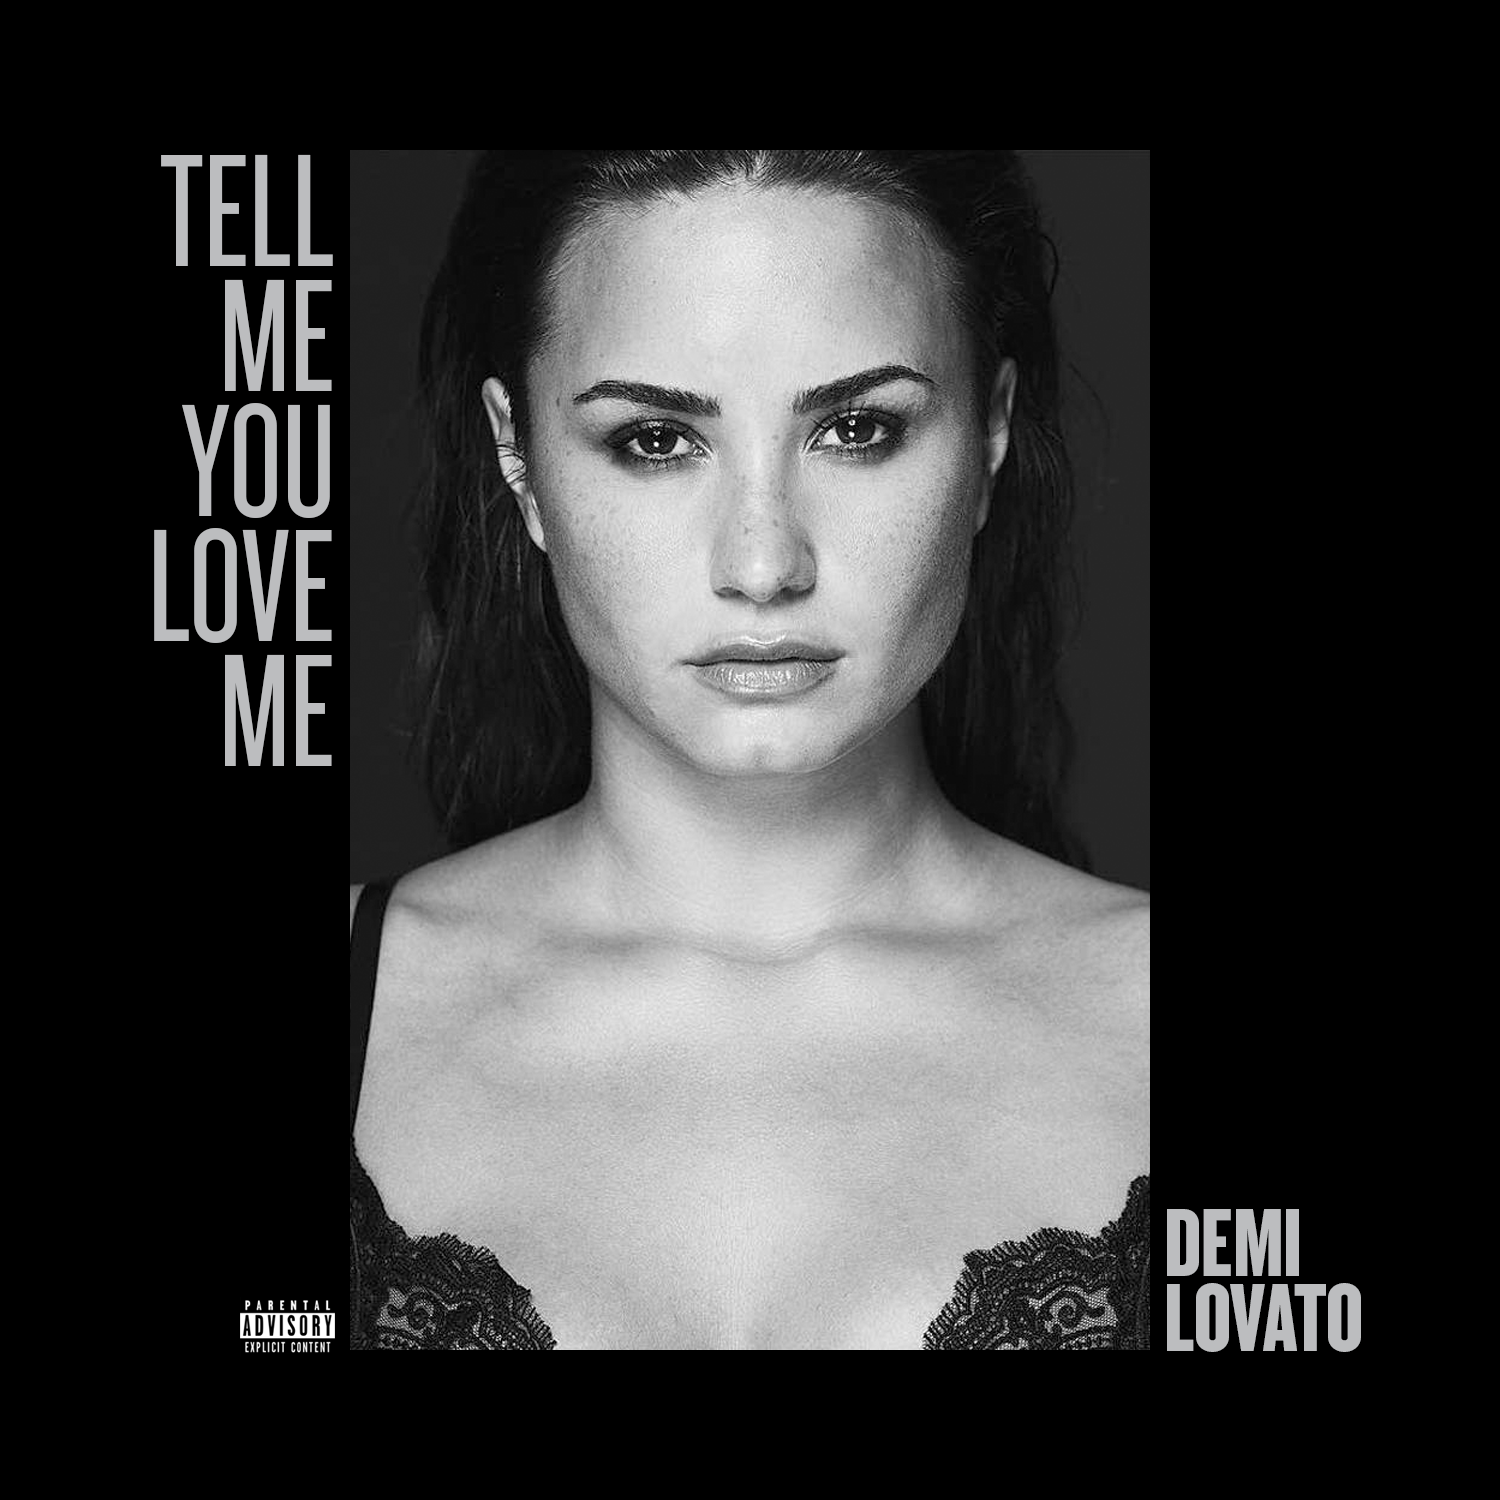 tell me you love me album free mp3 download